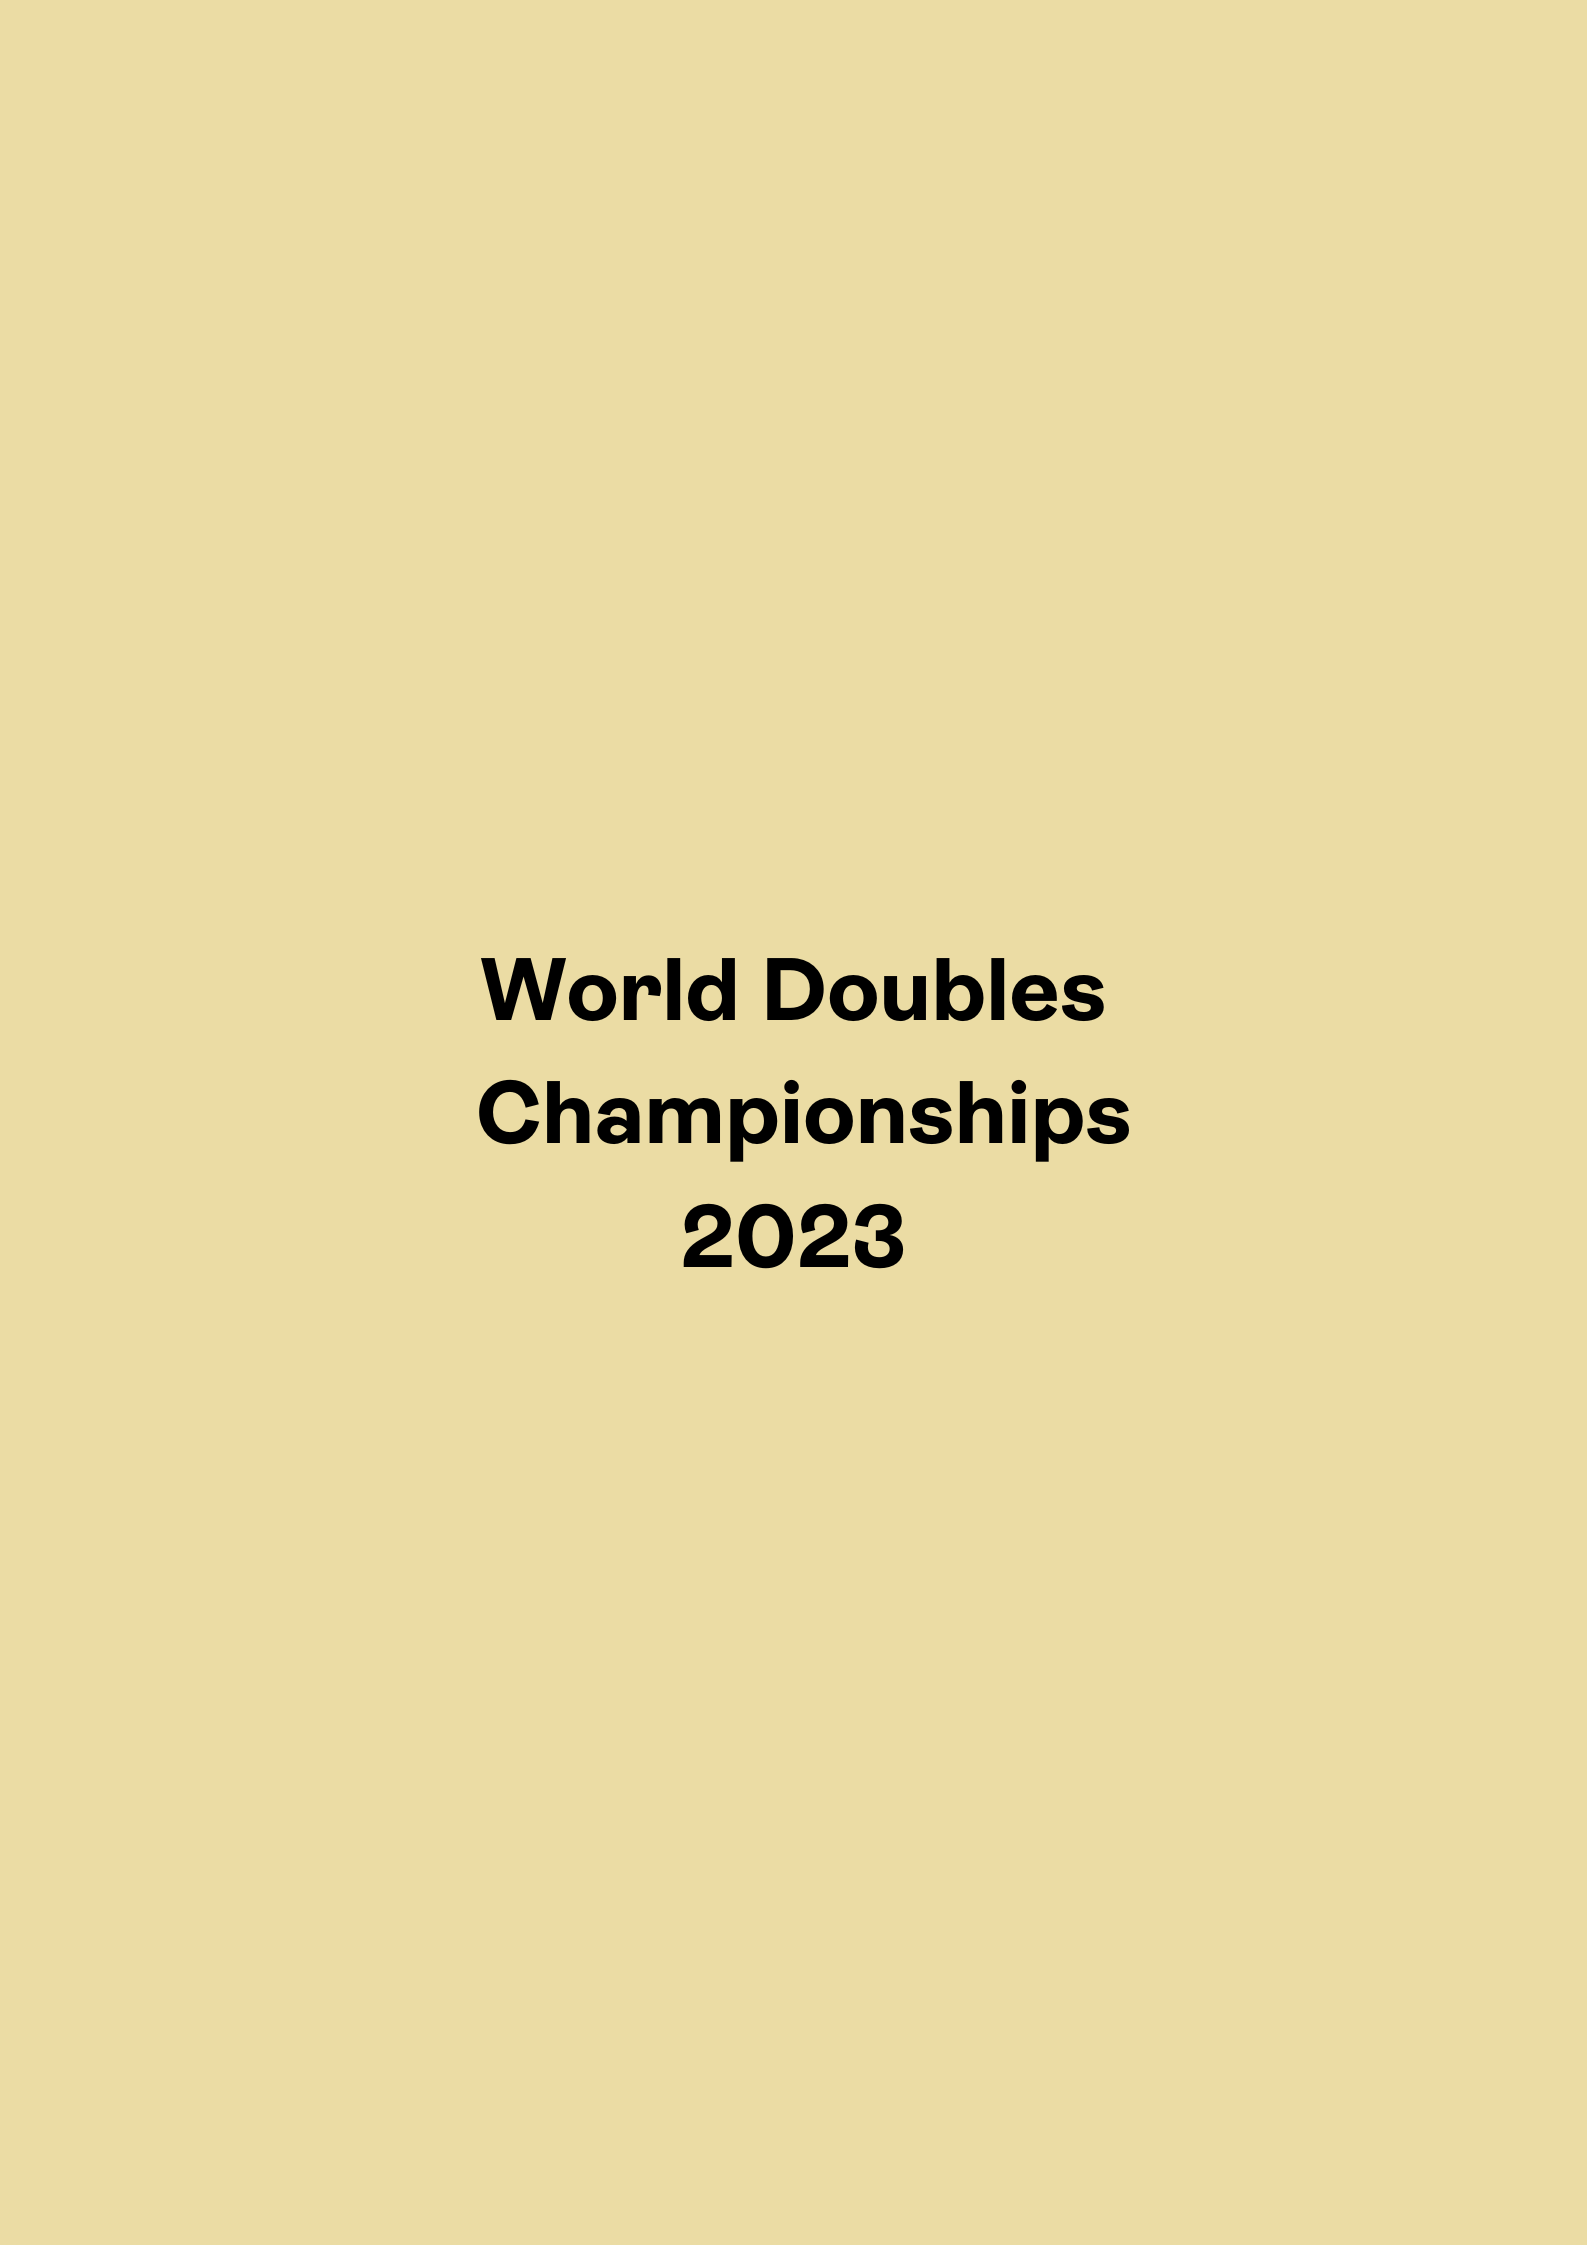 World Doubles Championships 2023